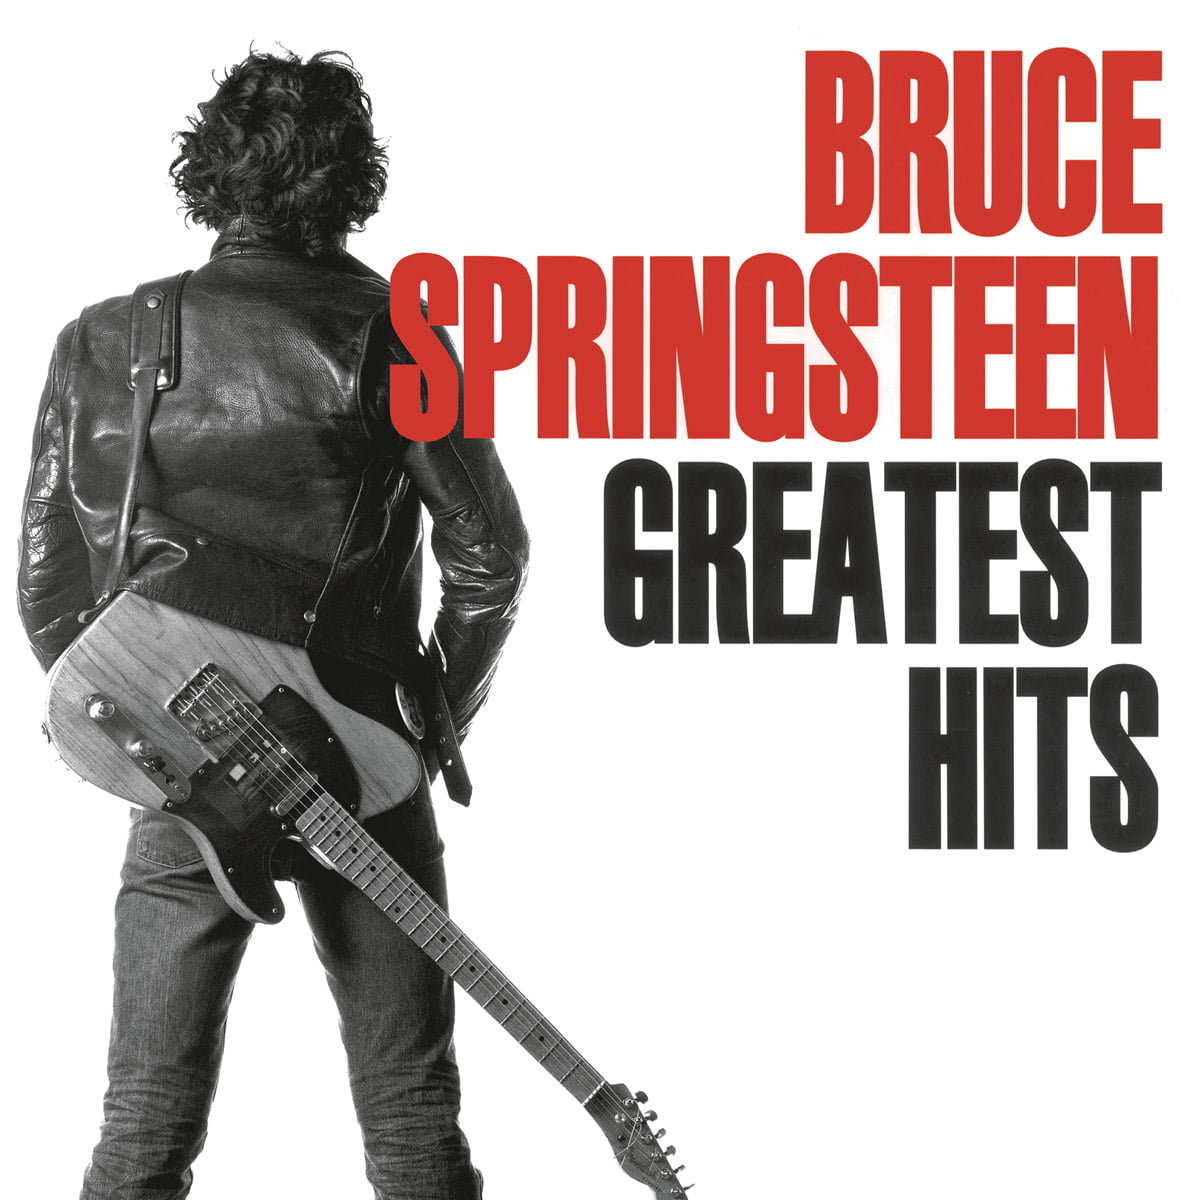 Bruce Springsteen Greatest Hits (1995) front cover